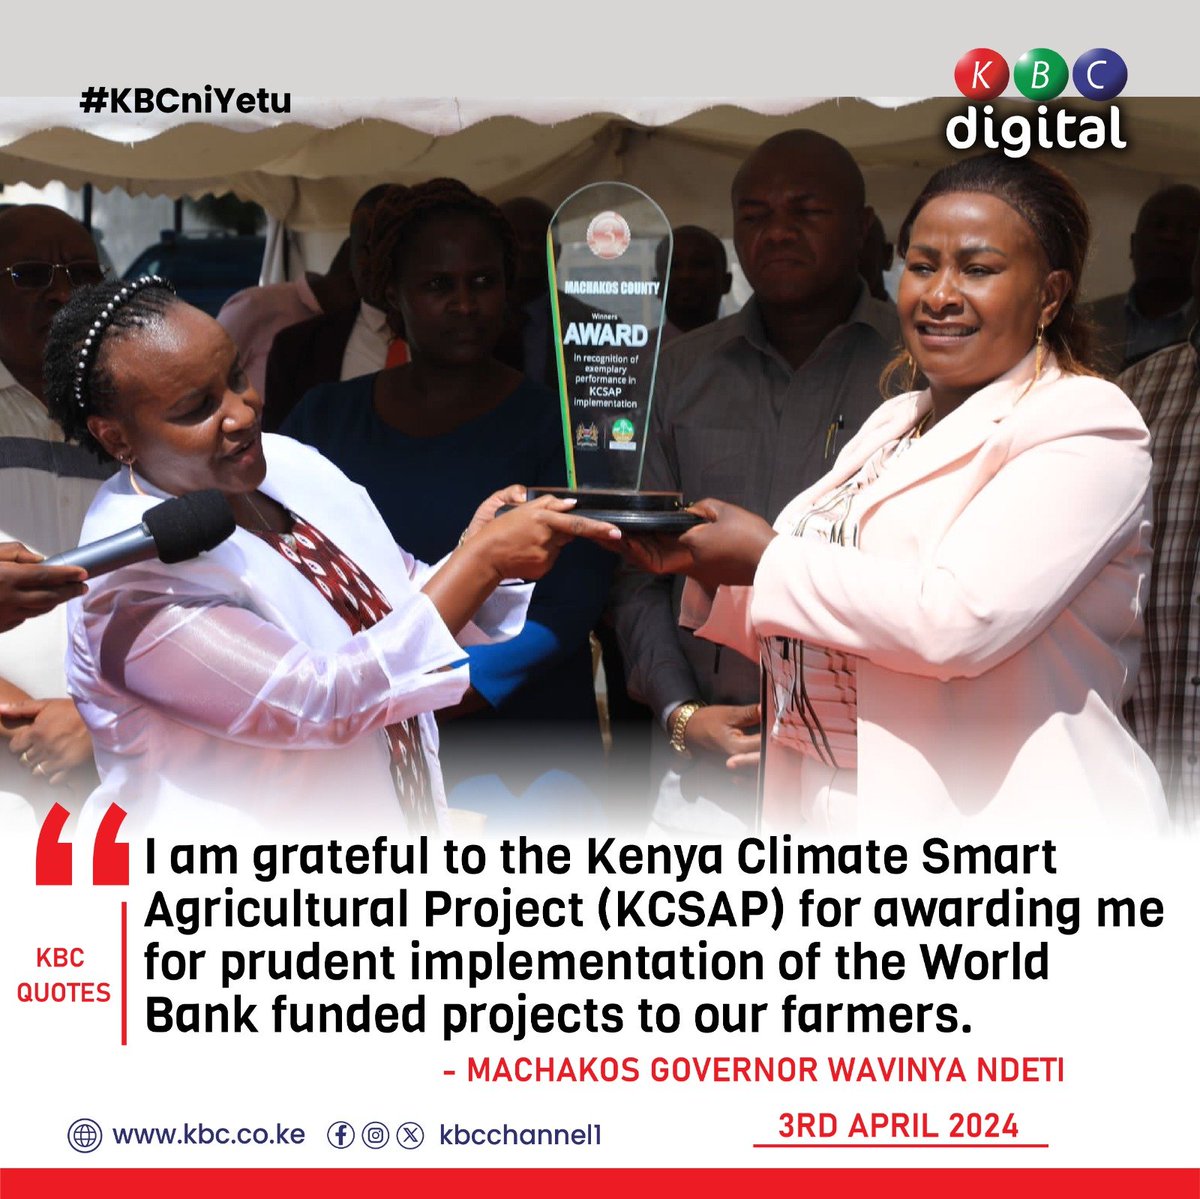 'I am grateful to the Kenya Climate Smart Agricultural Project (KCSAP) for awarding me for prudent implementation of the World Bank funded projects to our farmers.' - Machakos Governor Wavinya Ndeti #KBCniYetu ^RO